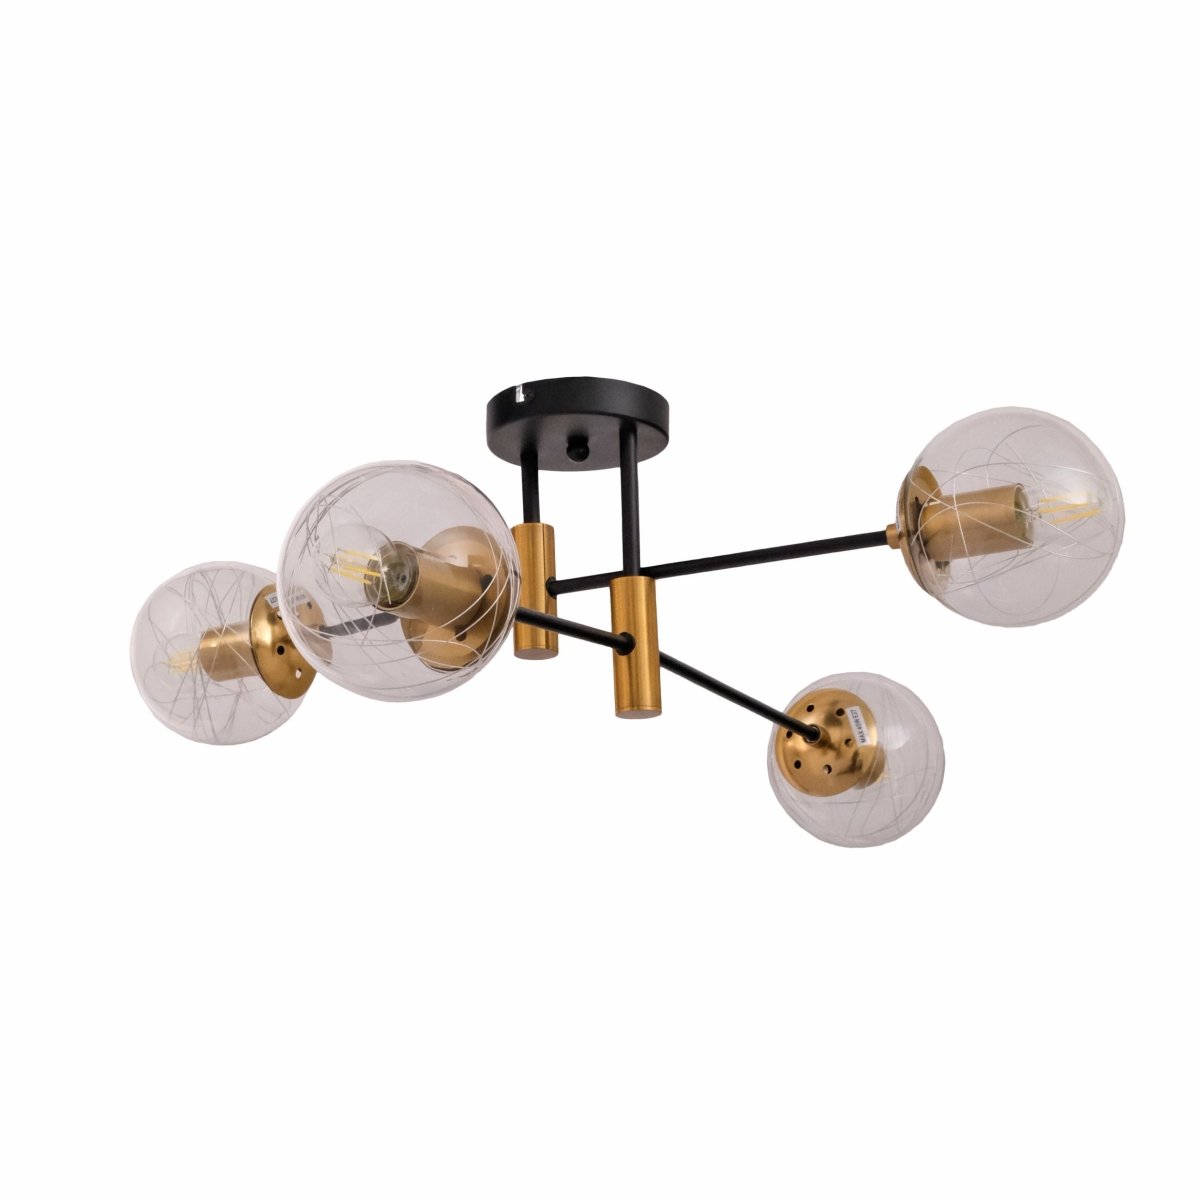 Main image of Clear Glass Globe Gold and Black Metal Semi Flush Ceiling Light with 4xE27 Fitting | TEKLED 159-17430